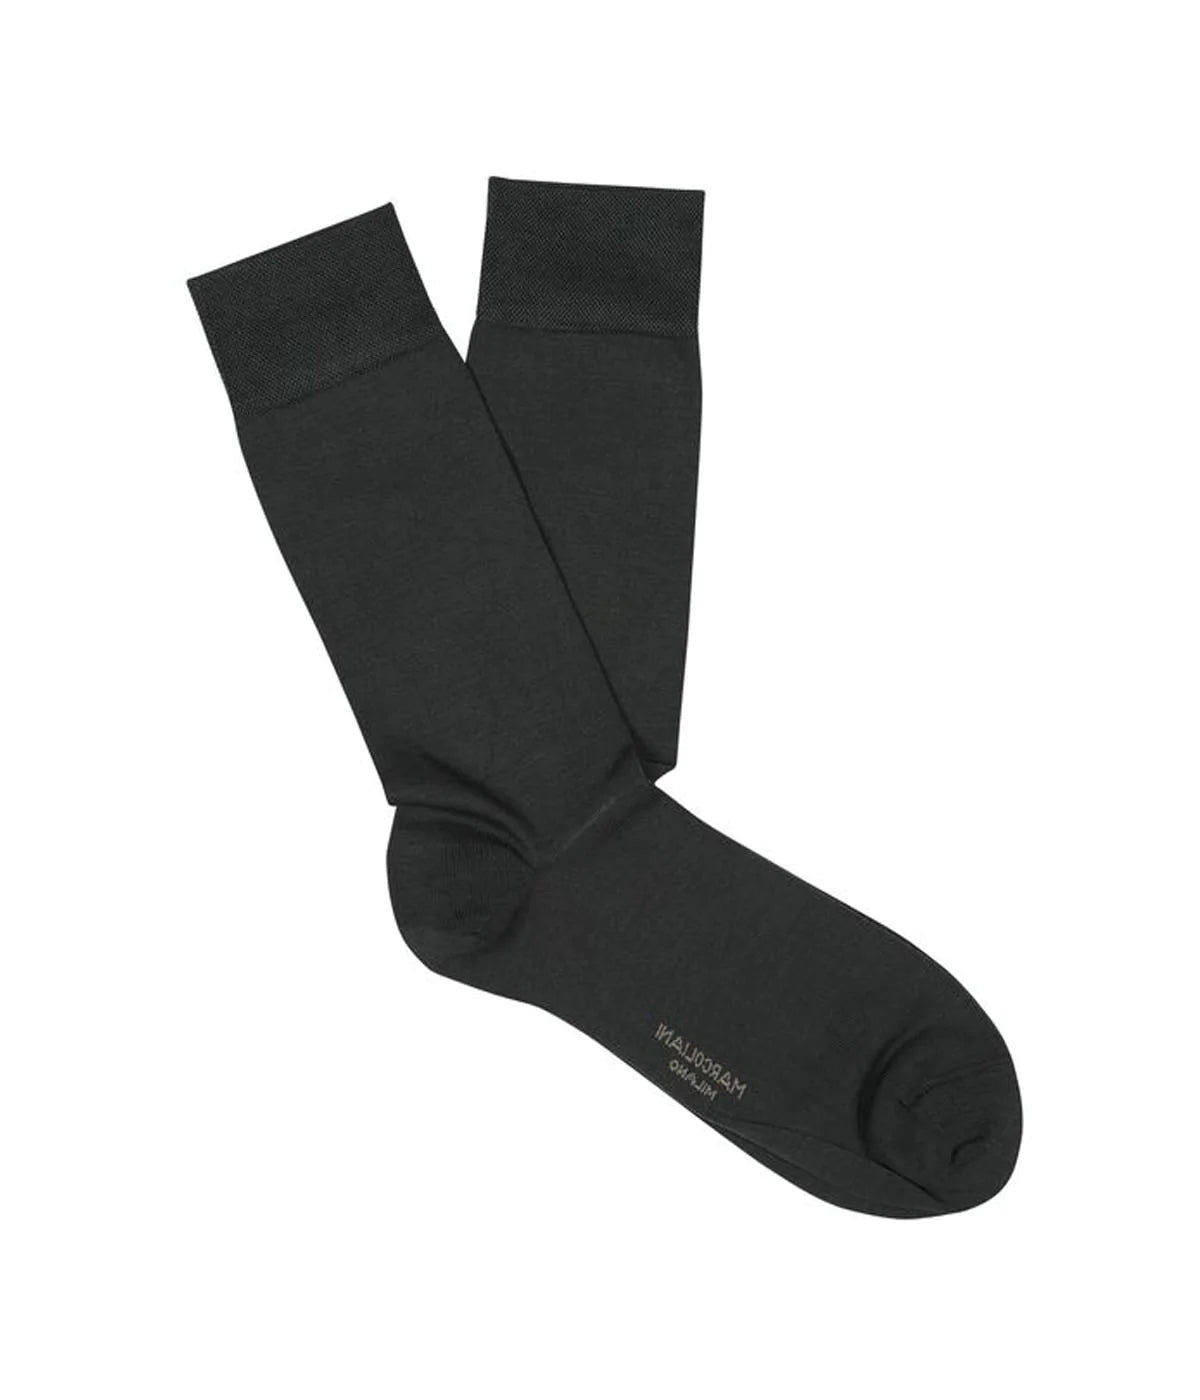 Mens Pima Cotton Sock in Charcoal